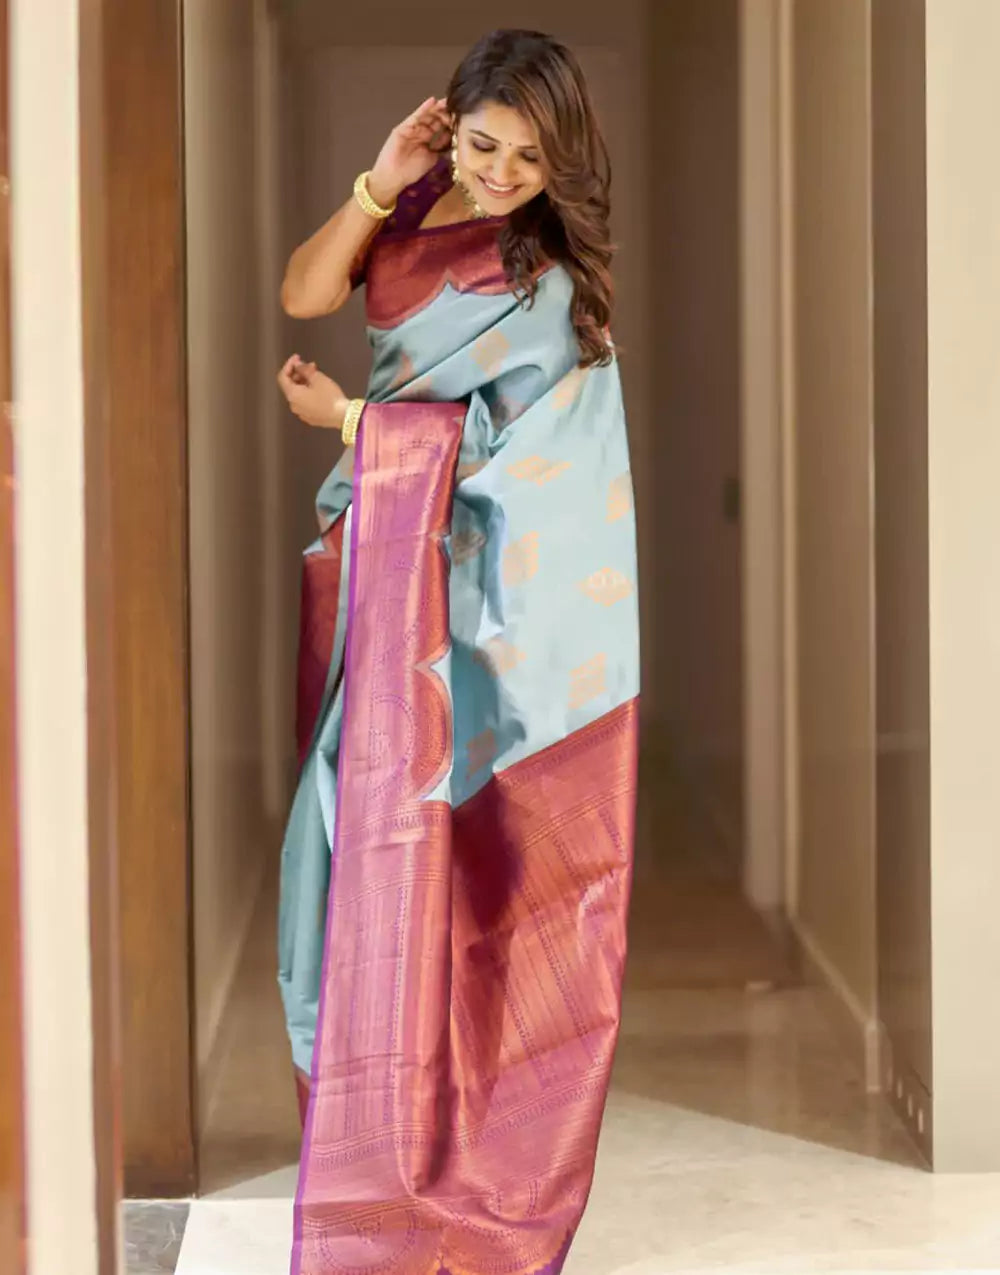 Violet And Sky Blue Colour Soft Lichi Silk Saree With Blouse